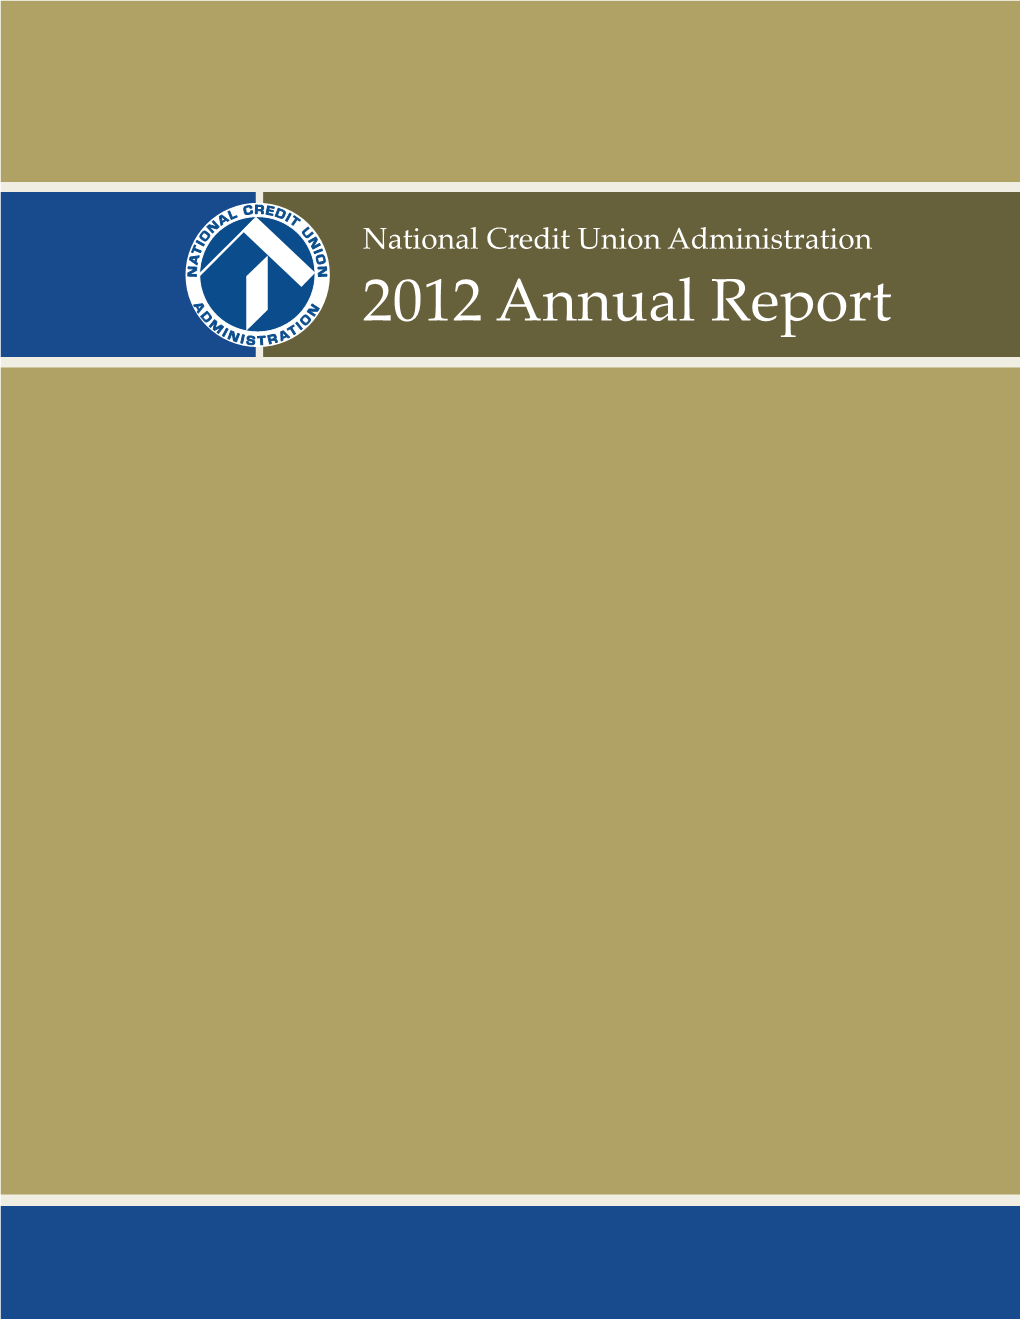 NCUA 2012 Annual Report National Credit Union Administration Ncuanational Credit Union Administration